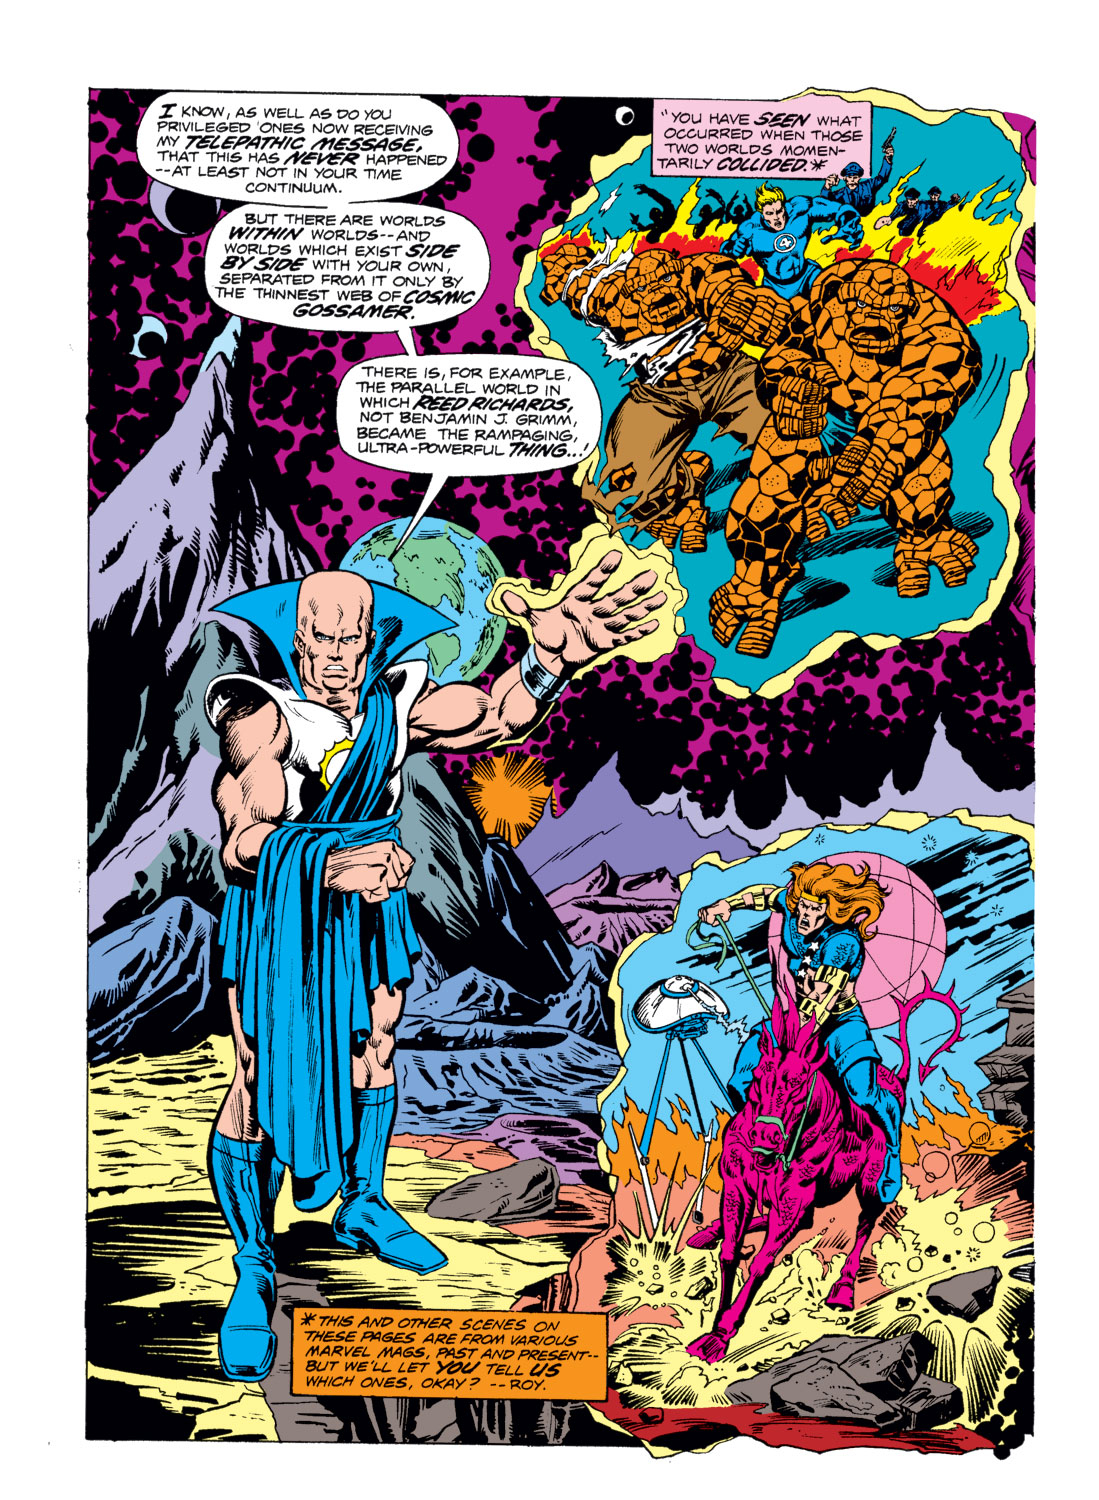 What If? (1977) issue 1 - Spider-Man joined the Fantastic Four - Page 3